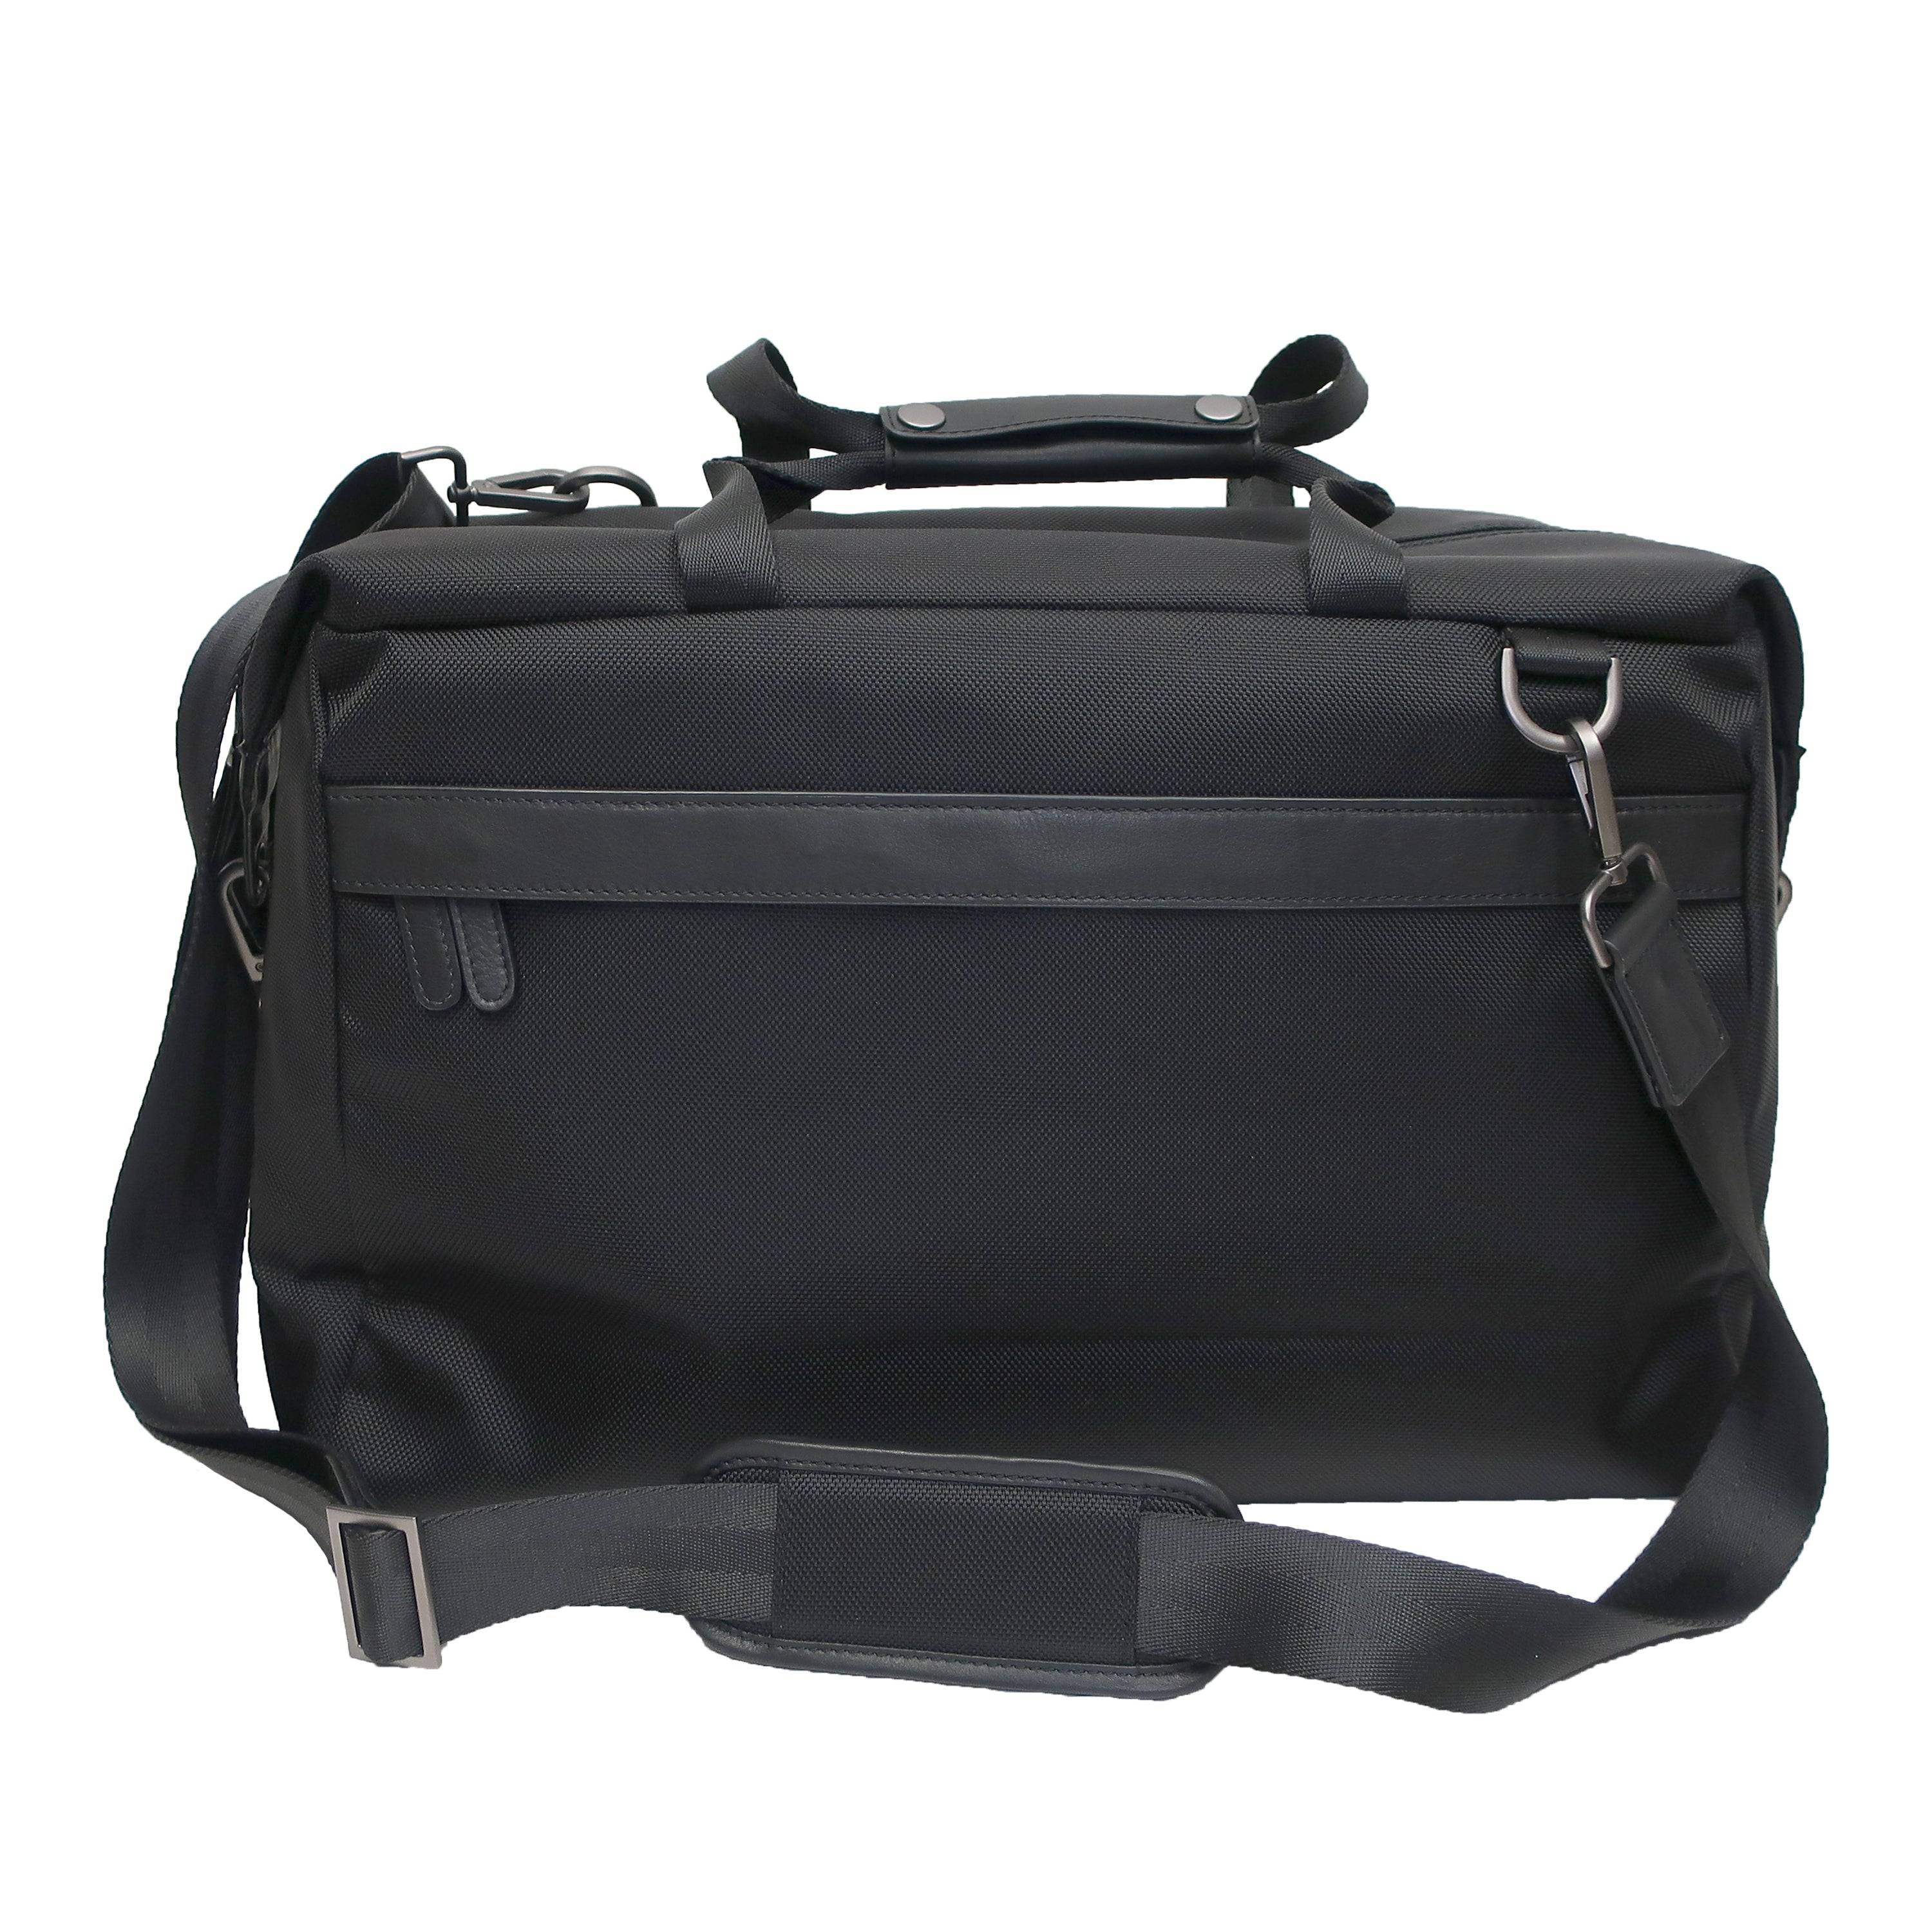 front zip pocket with shoulder strap and top handles on ballistic nylon leather trim duffel bag 